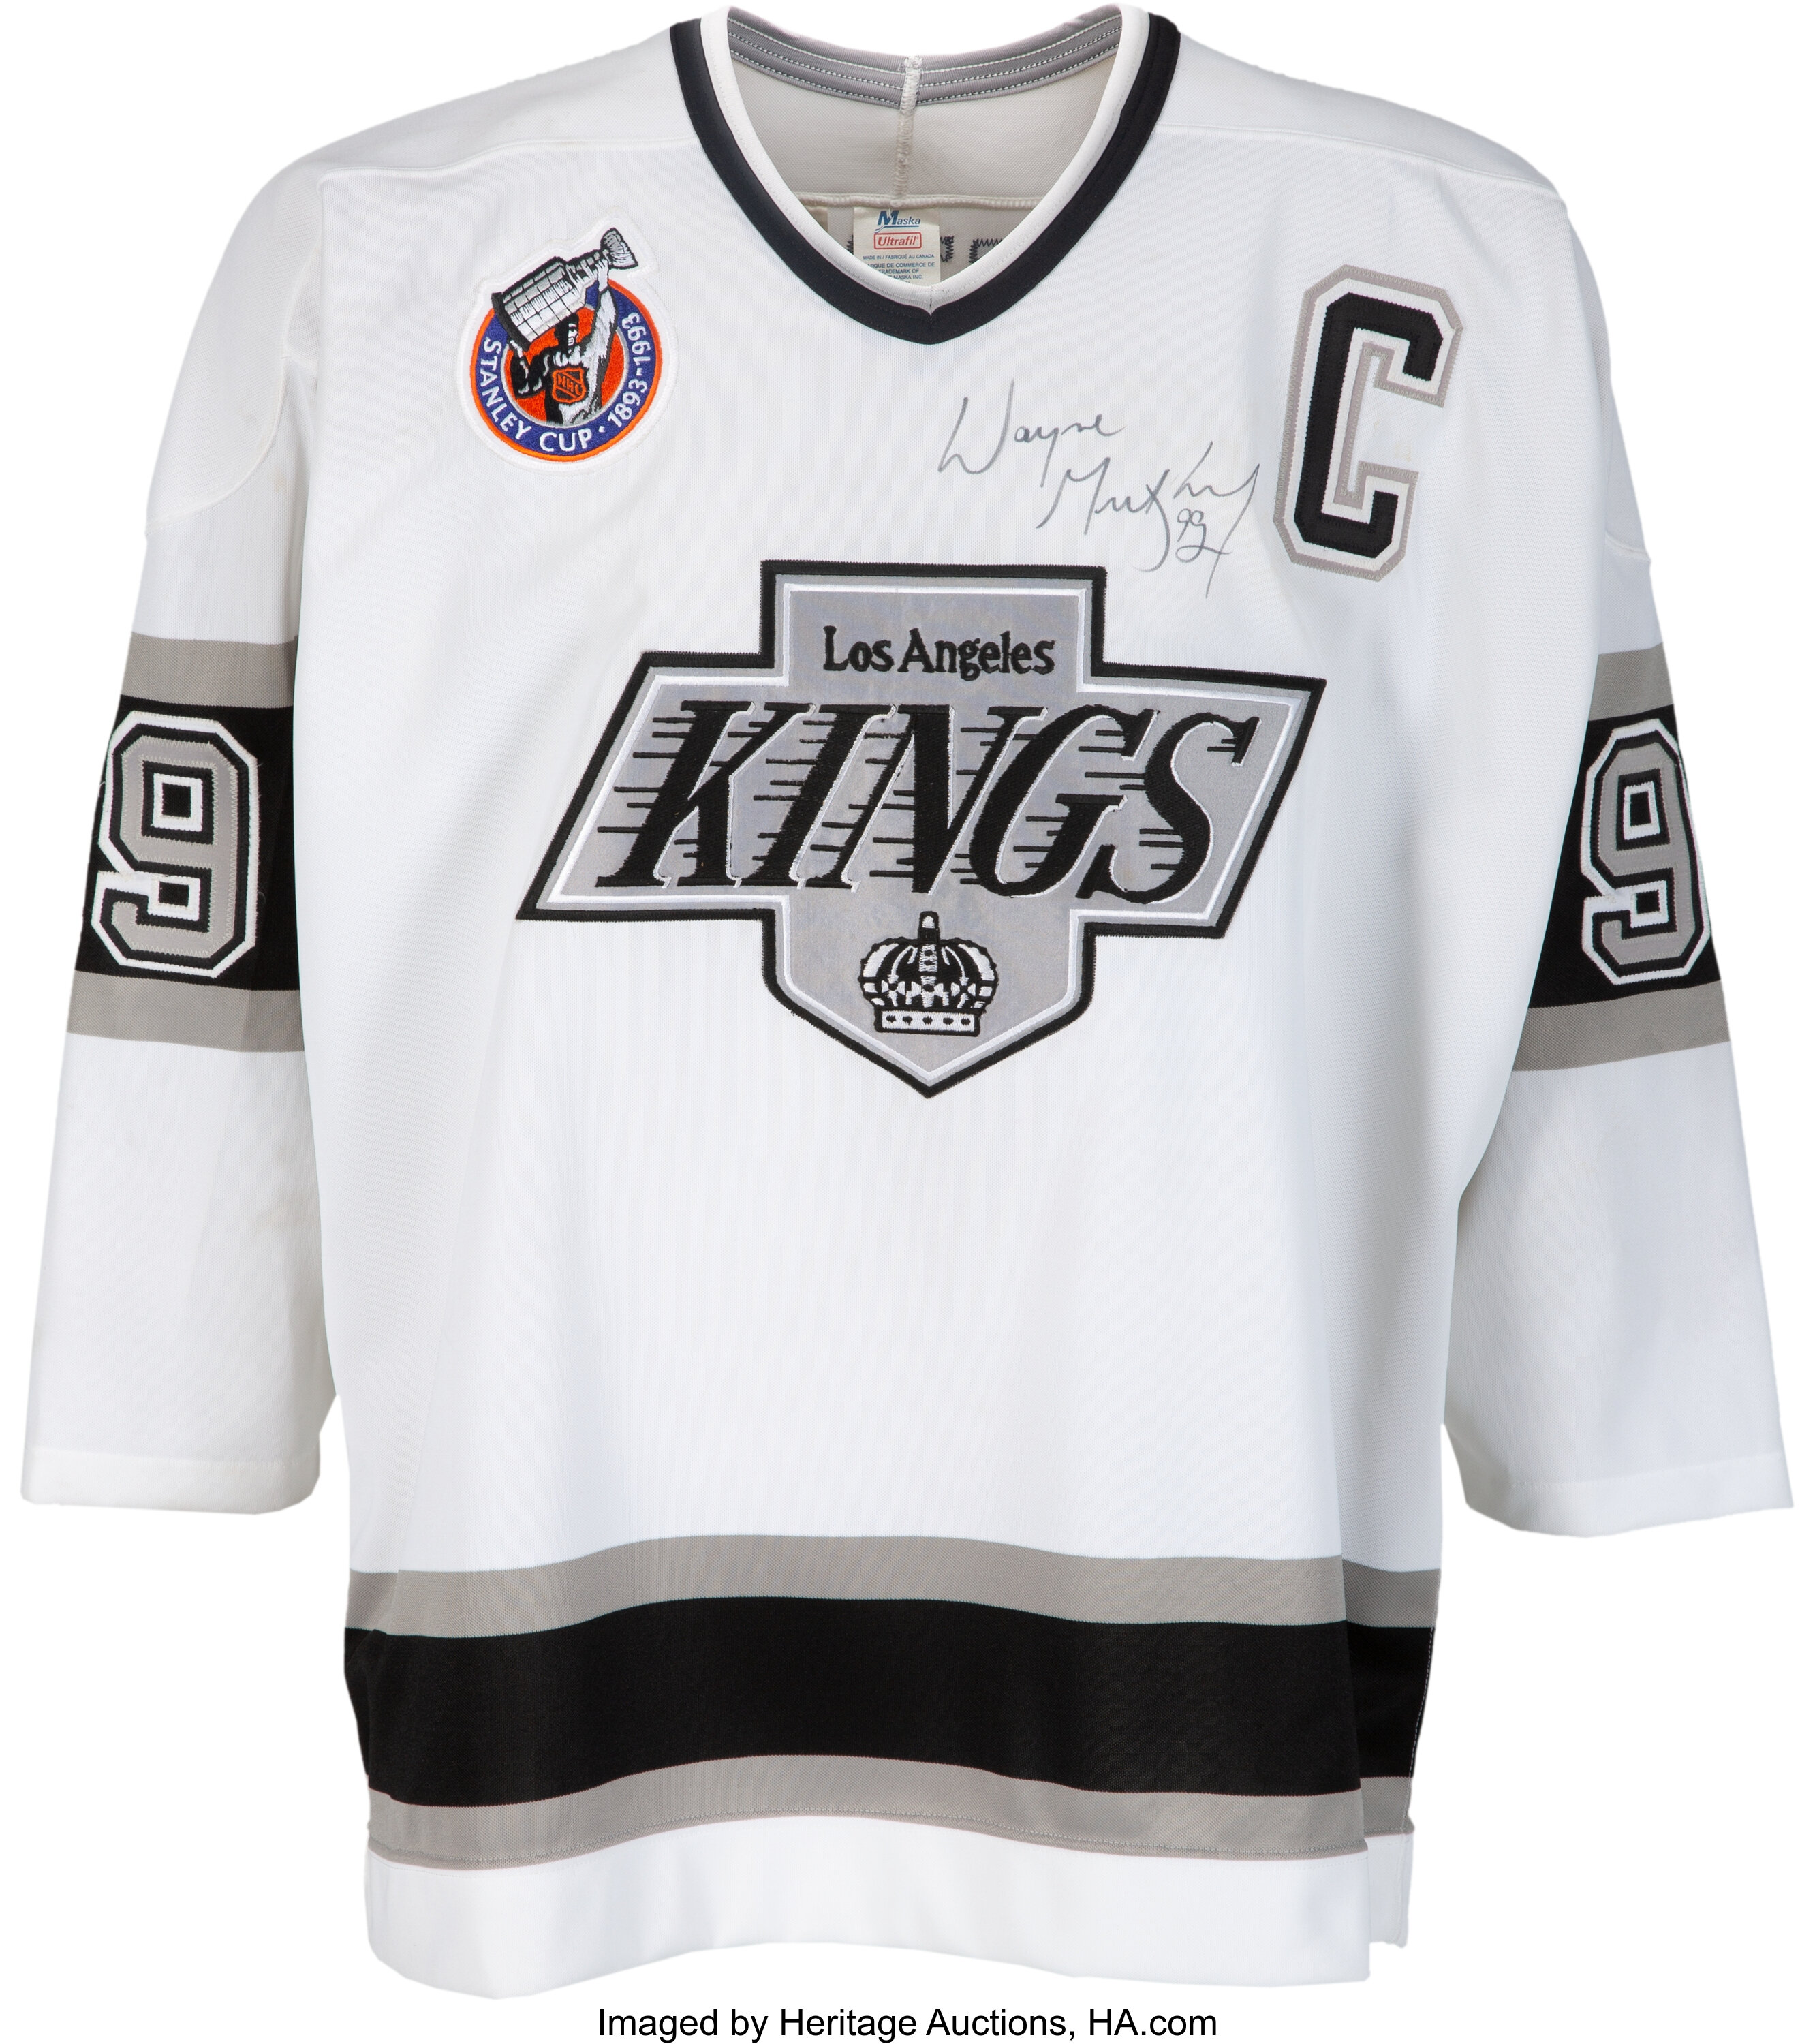 Kings unveil new Gretzky Era-inspired alternate jersey – Daily News